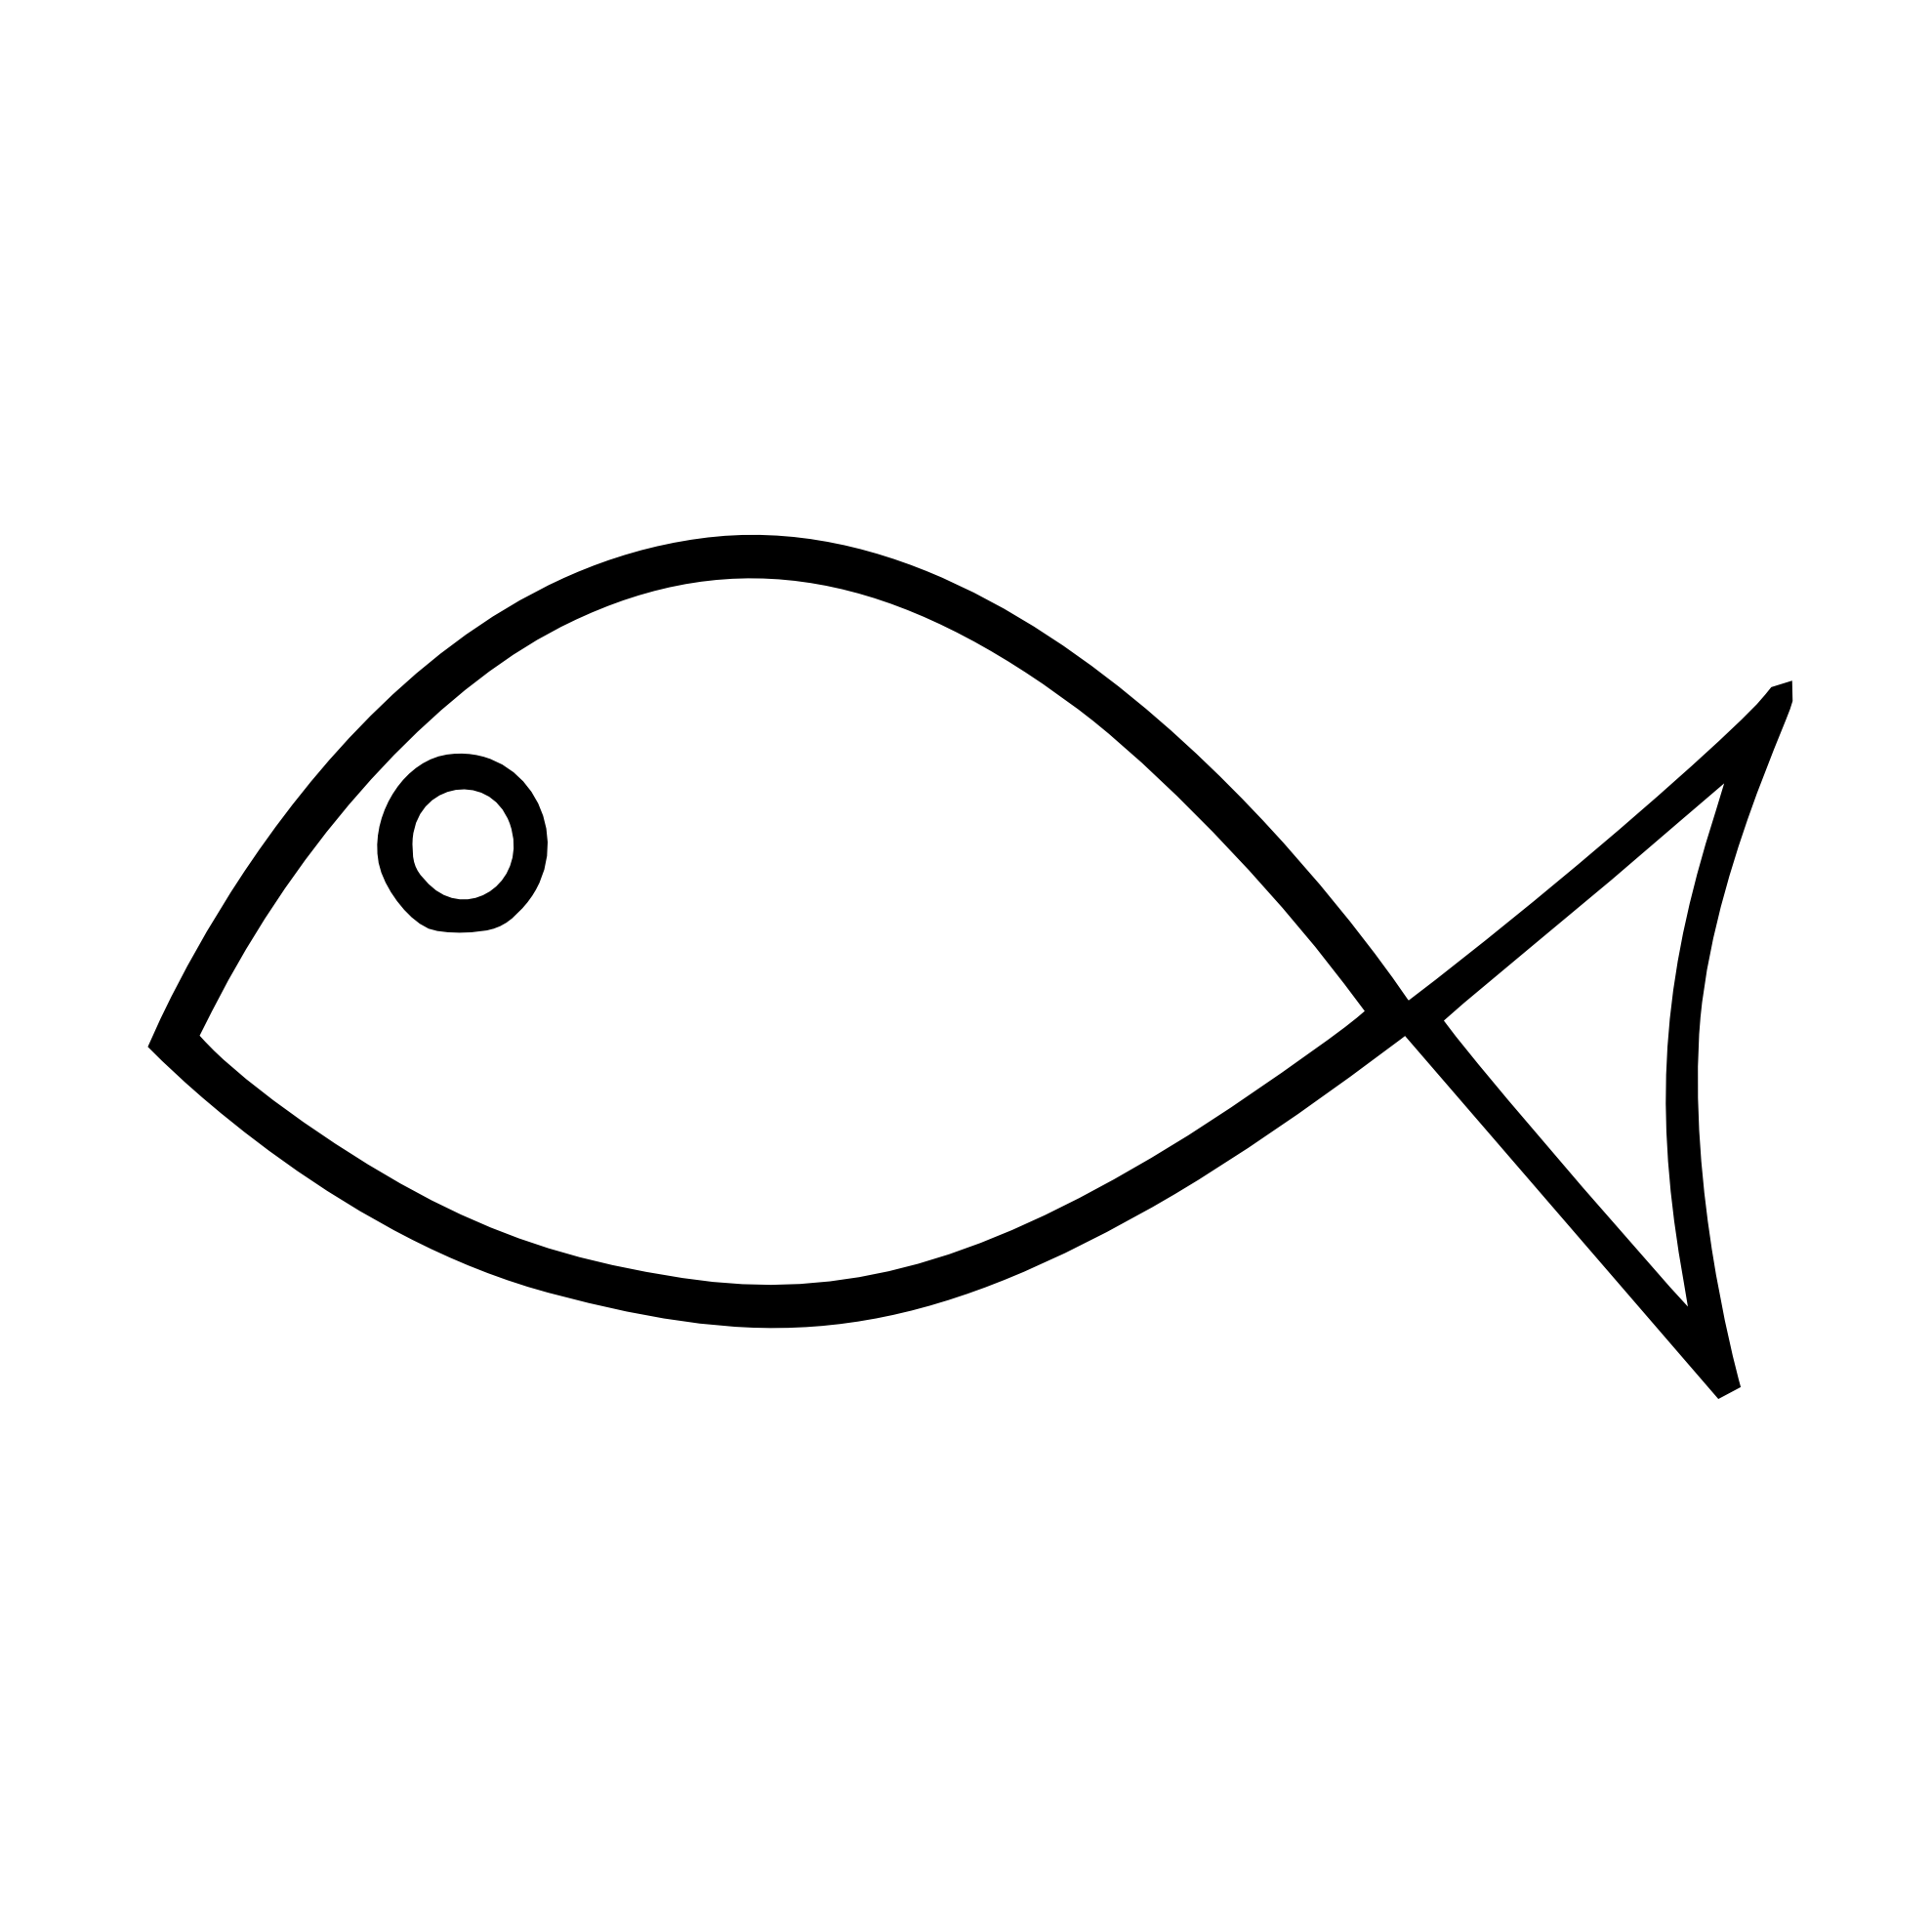 Fish Outline Clipart Black And White | Clipart Panda - Free ...